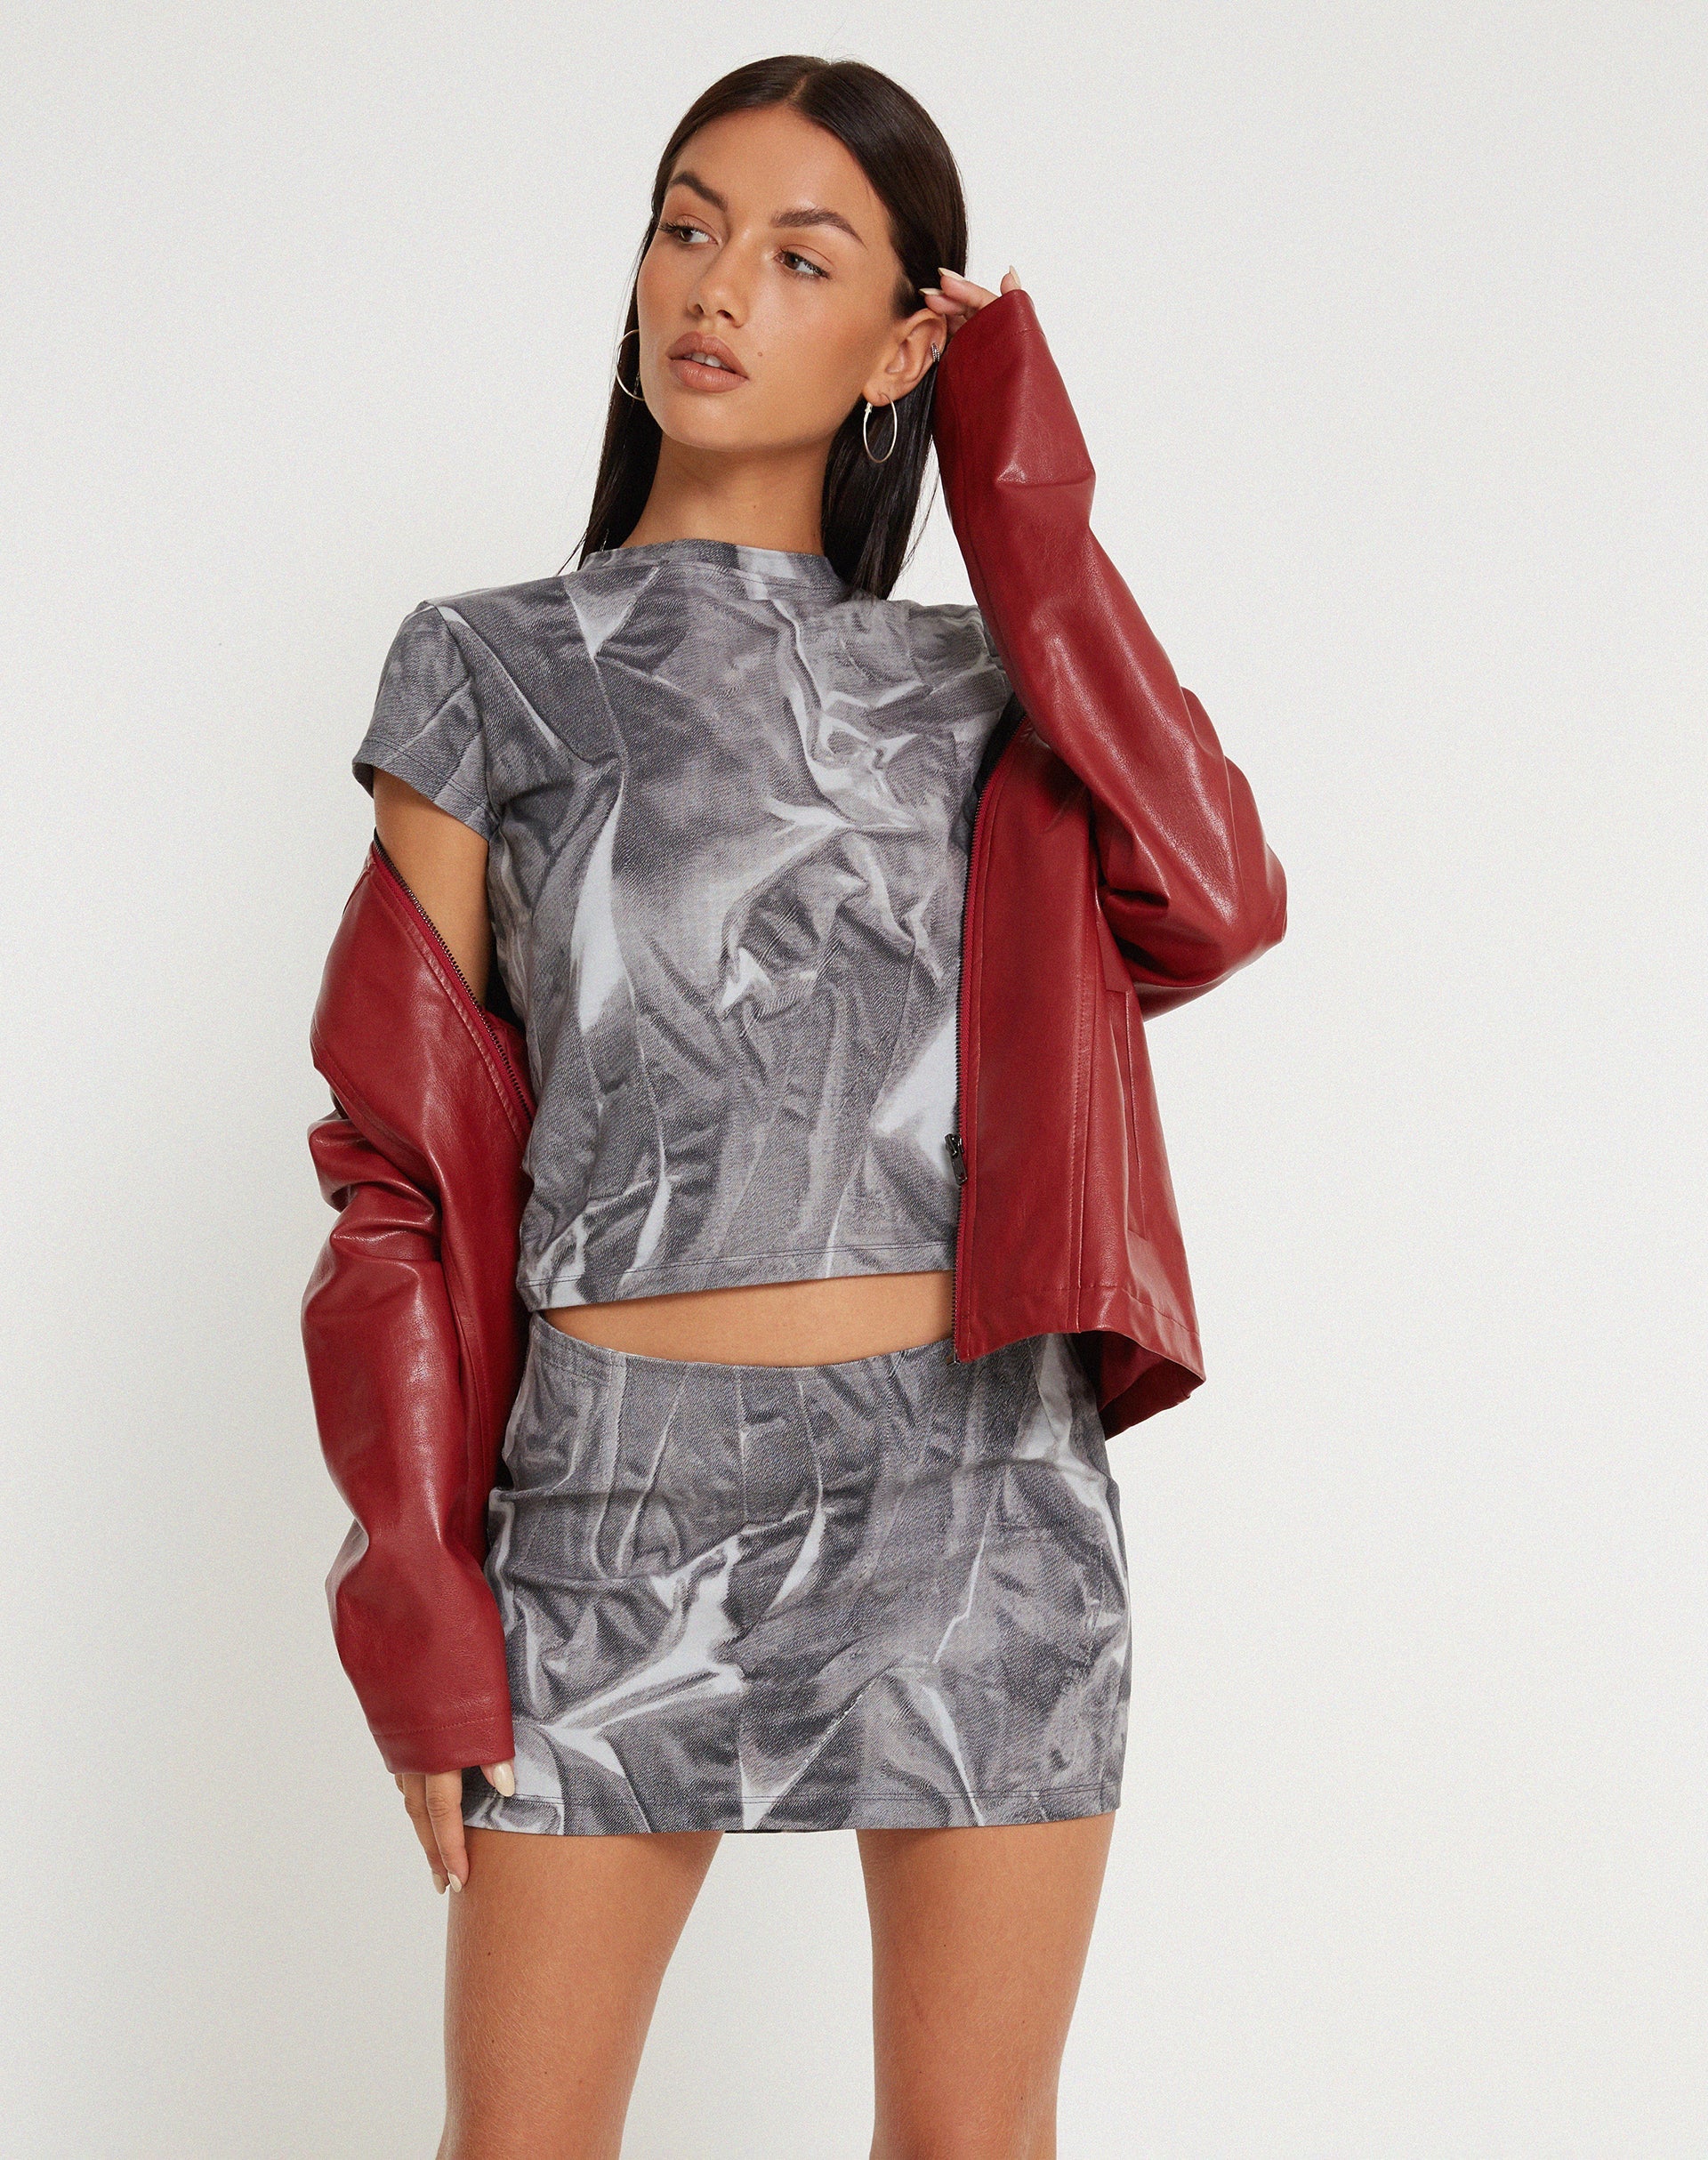 image of Tiona Cropped Tee in Dystopian Crease Grey